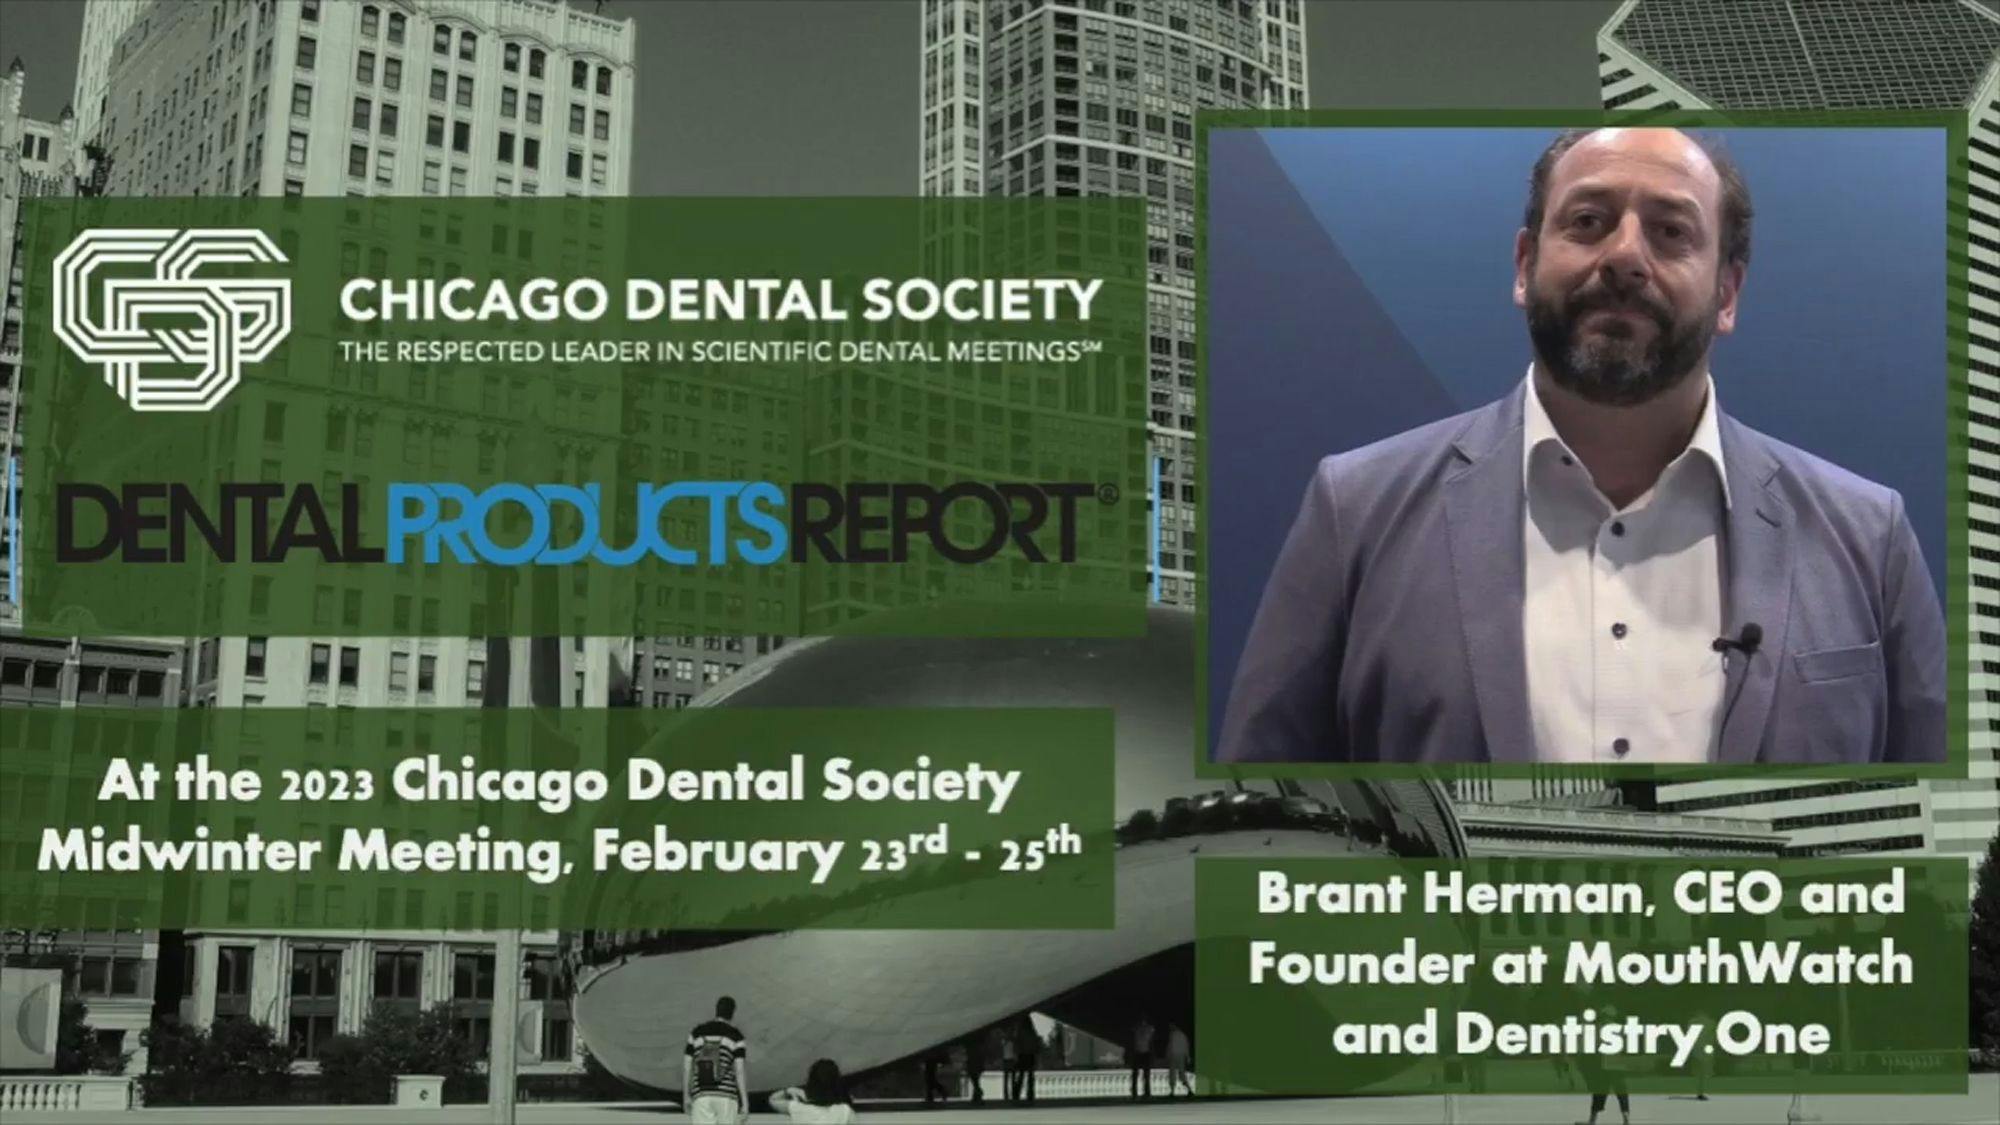 2023 Chicago Dental Society Midwinter Meeting, Interview with Brant Herman, CEO and Founder at MouthWatch and Dentistry.One